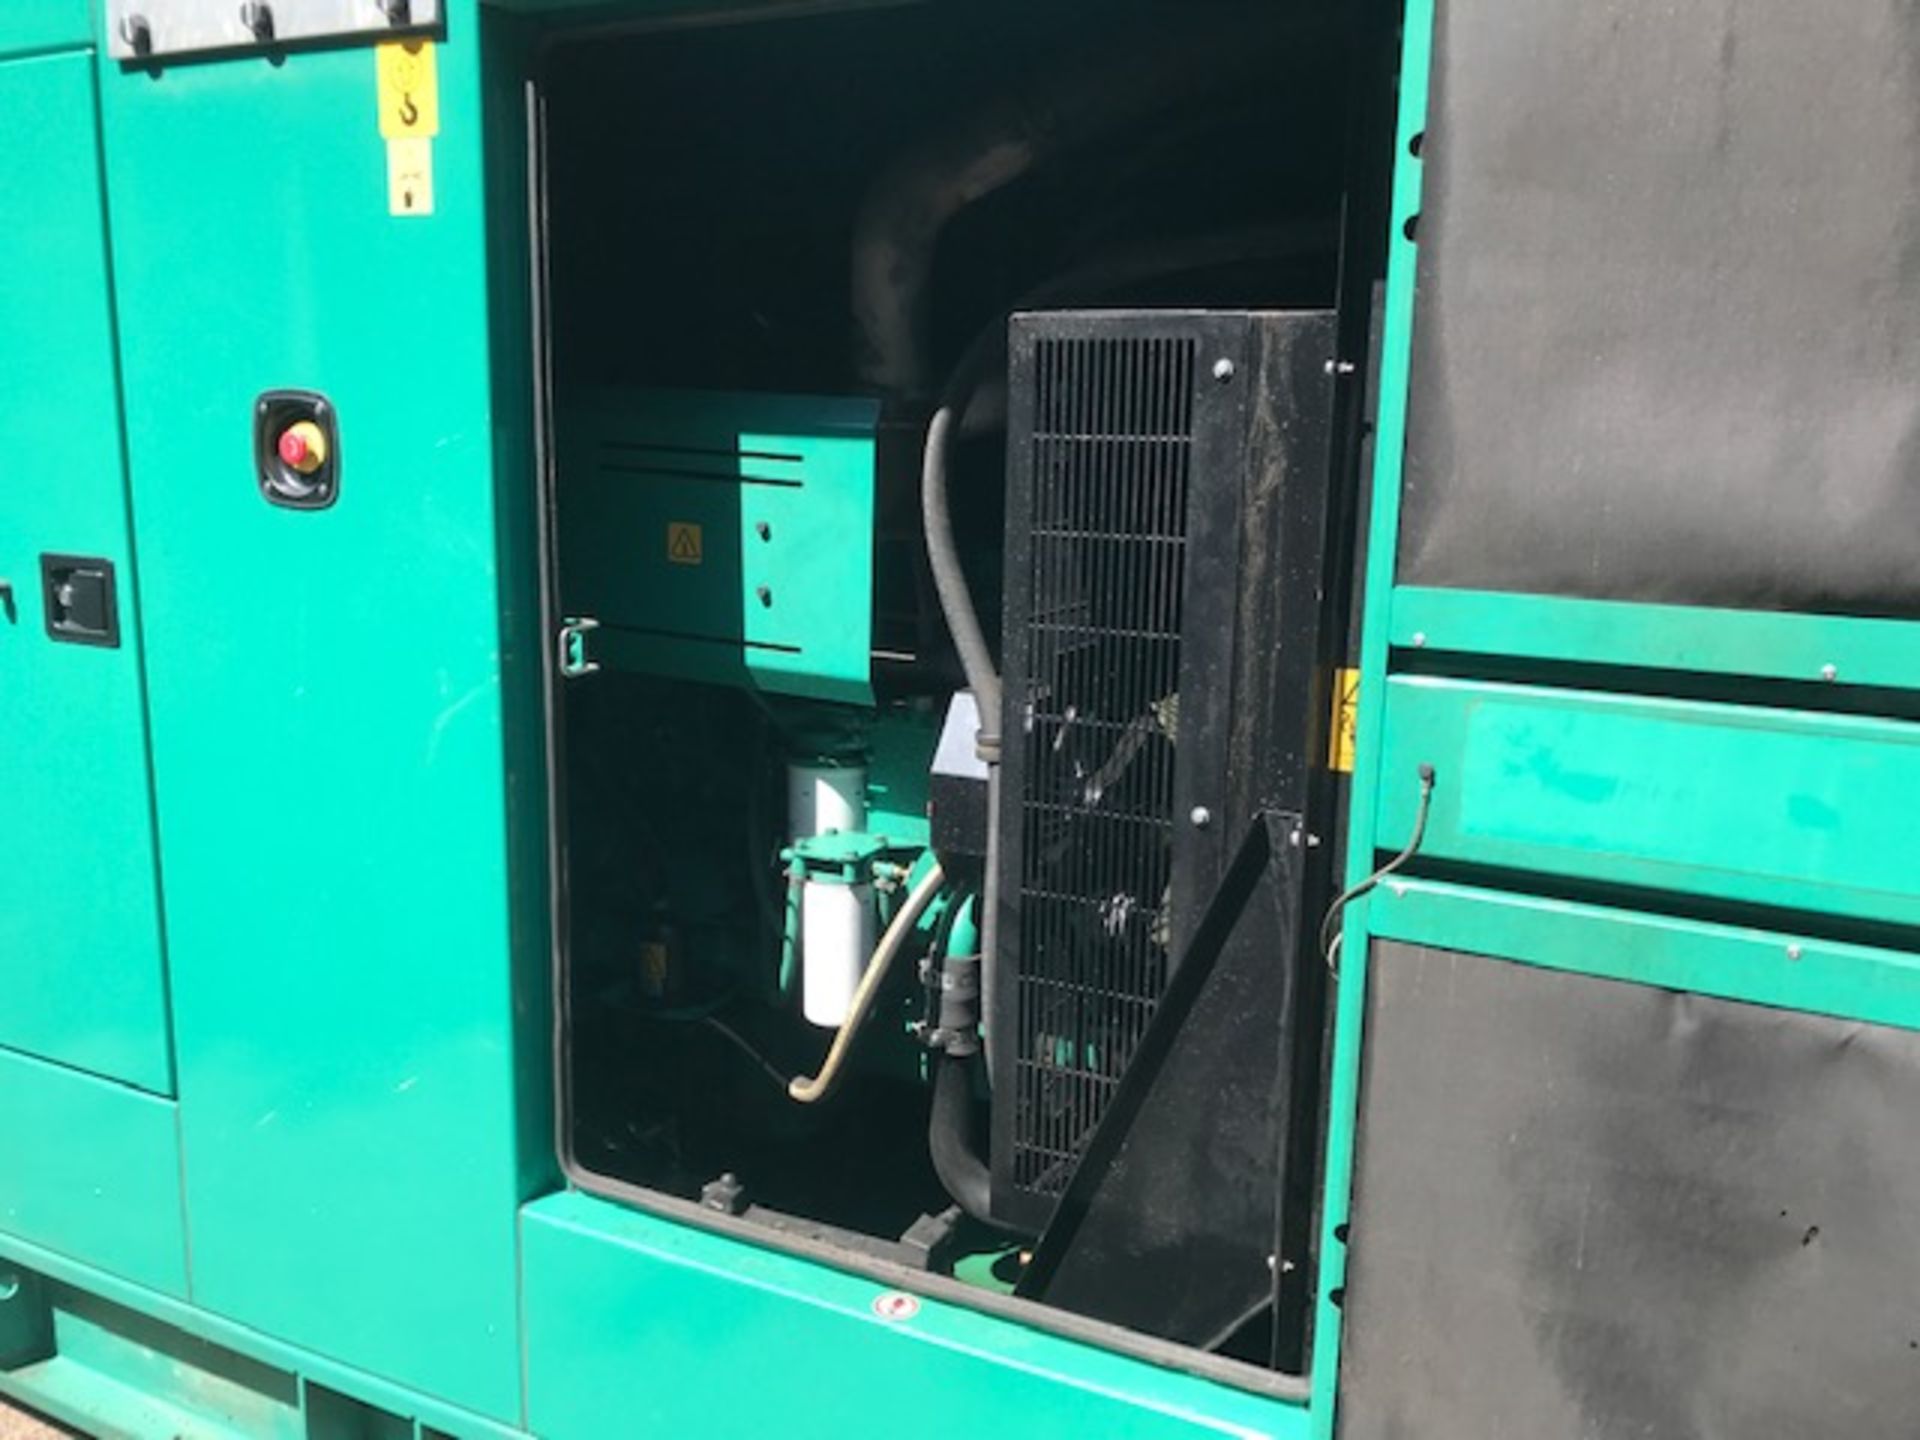 CUMMINS ENGINED 300KVA GENERATOR YEAR 2012 8367 REC HRS. DIRECT FROM LOCAL COMPANY AFTER UPGRADING - Image 13 of 14